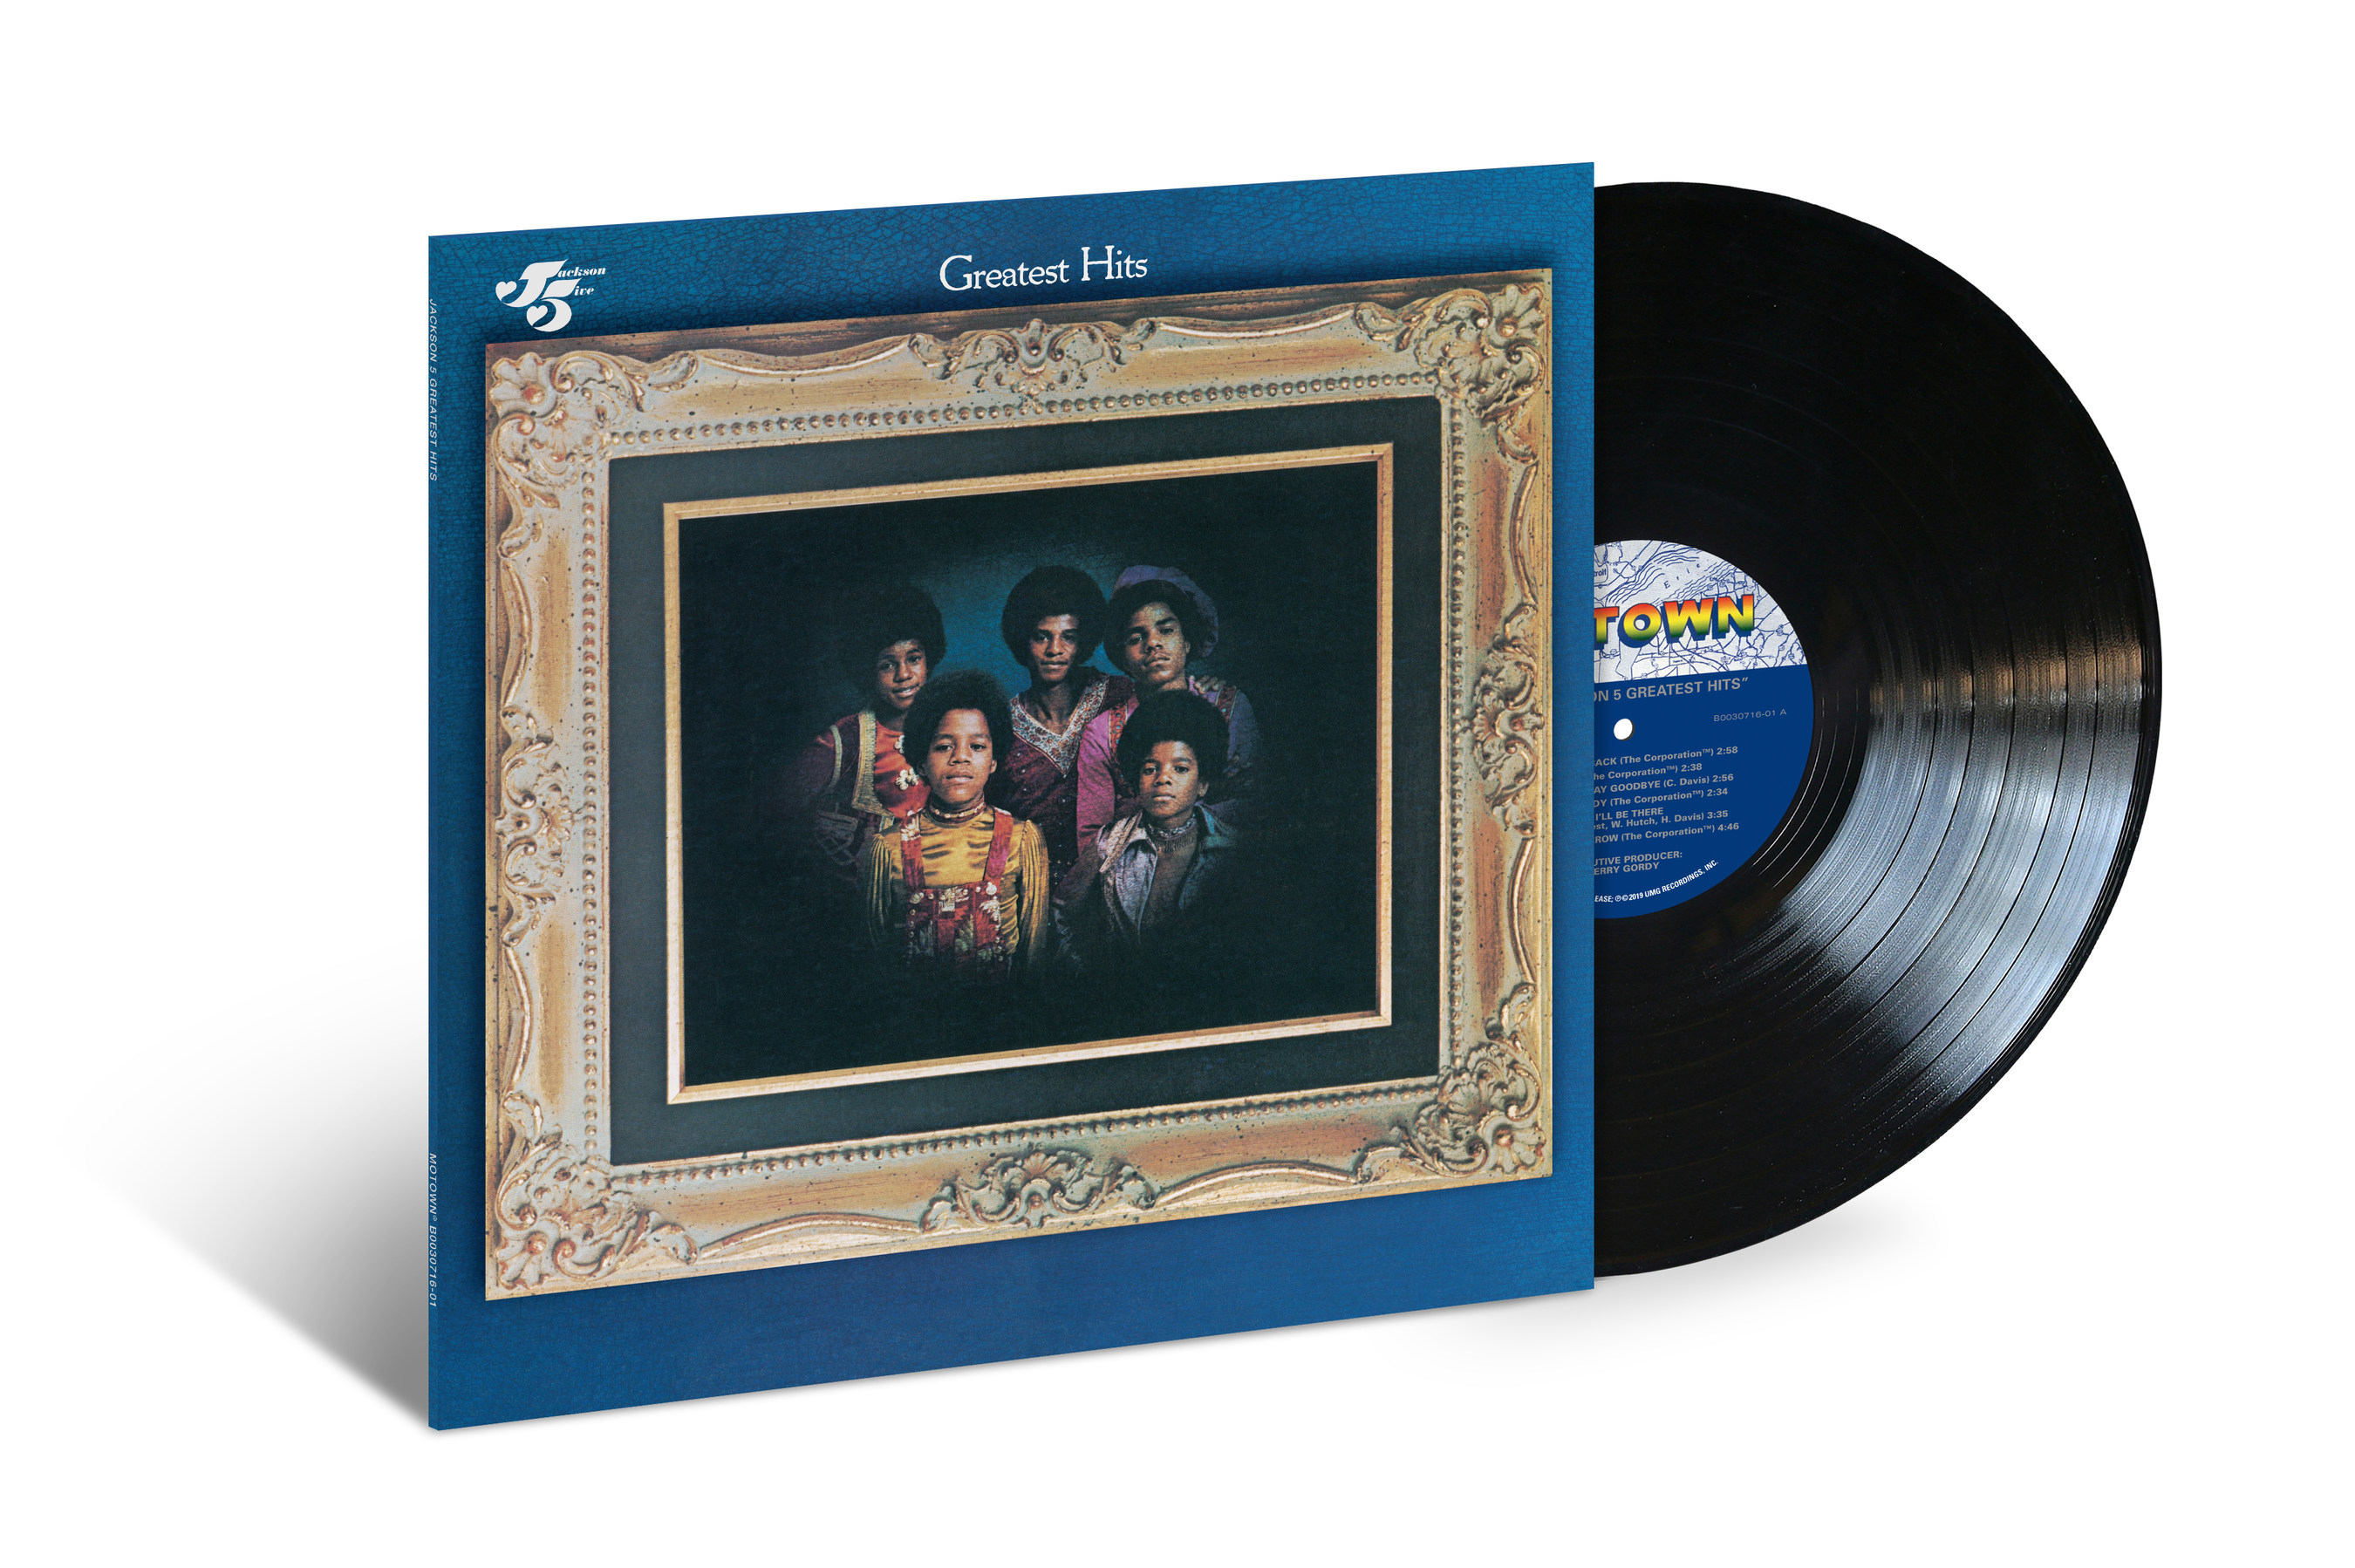 Greatest hits collection. Jackson 5 пластинка. The Jackson 5 – Greatest Hits Vinyl. Jackson 5 Greatest Hits album foto. Q65 Greatest Hits LP Vinyl.